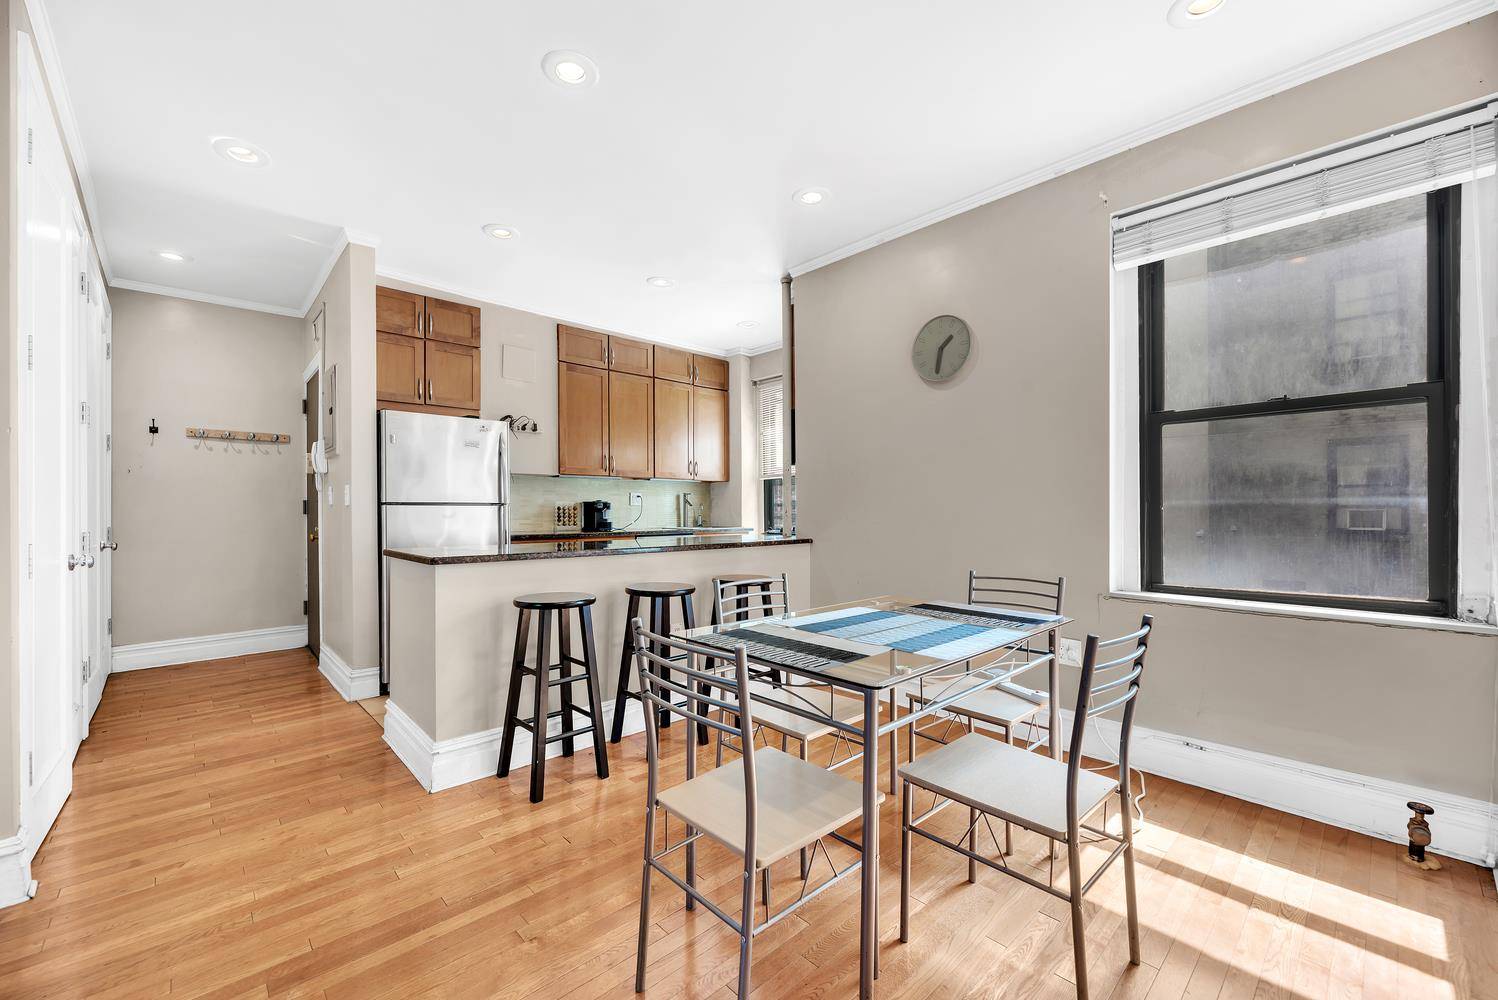 Financing now available. 2 bedrooms 1 bath coop apartment in Astoria, Queens at the Acropolis Gardens Complex.